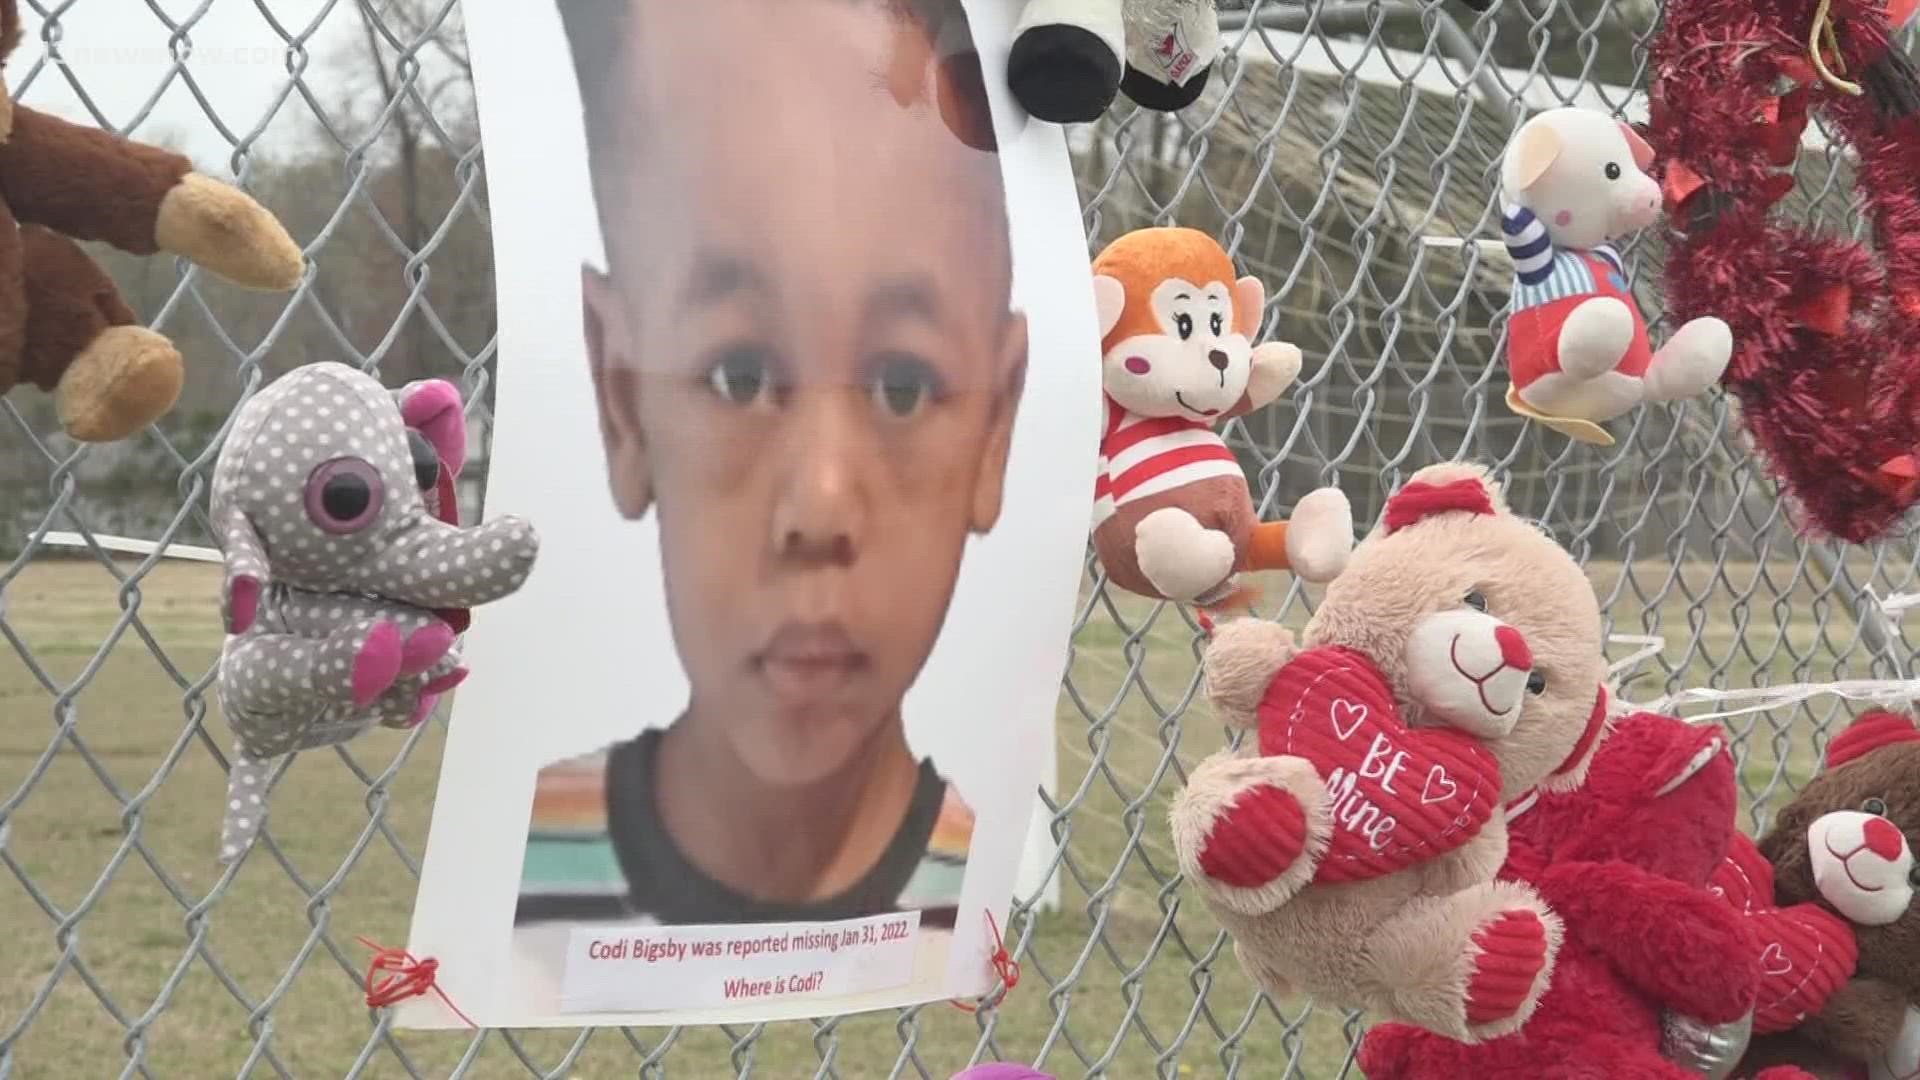 Two long months have passed since we learned of the disappearance of 4-year-old Codi Bigsby.